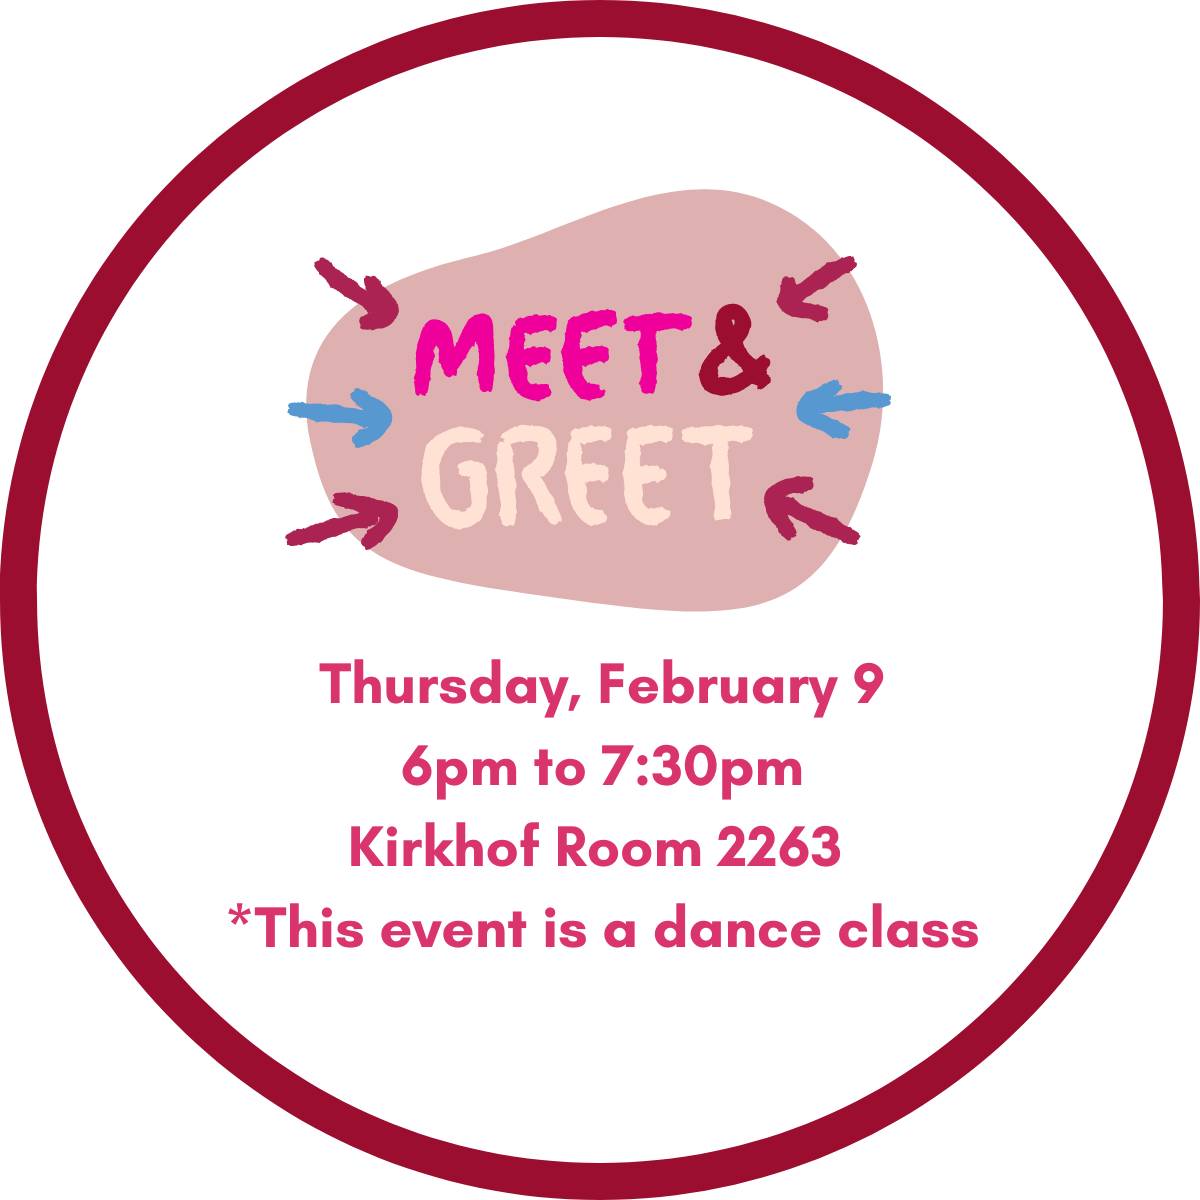 Professionals Meet & Greet on Thursday, February 9th 6pm to 7:30pm Kirkhof Room 2263. This event is a dance class.